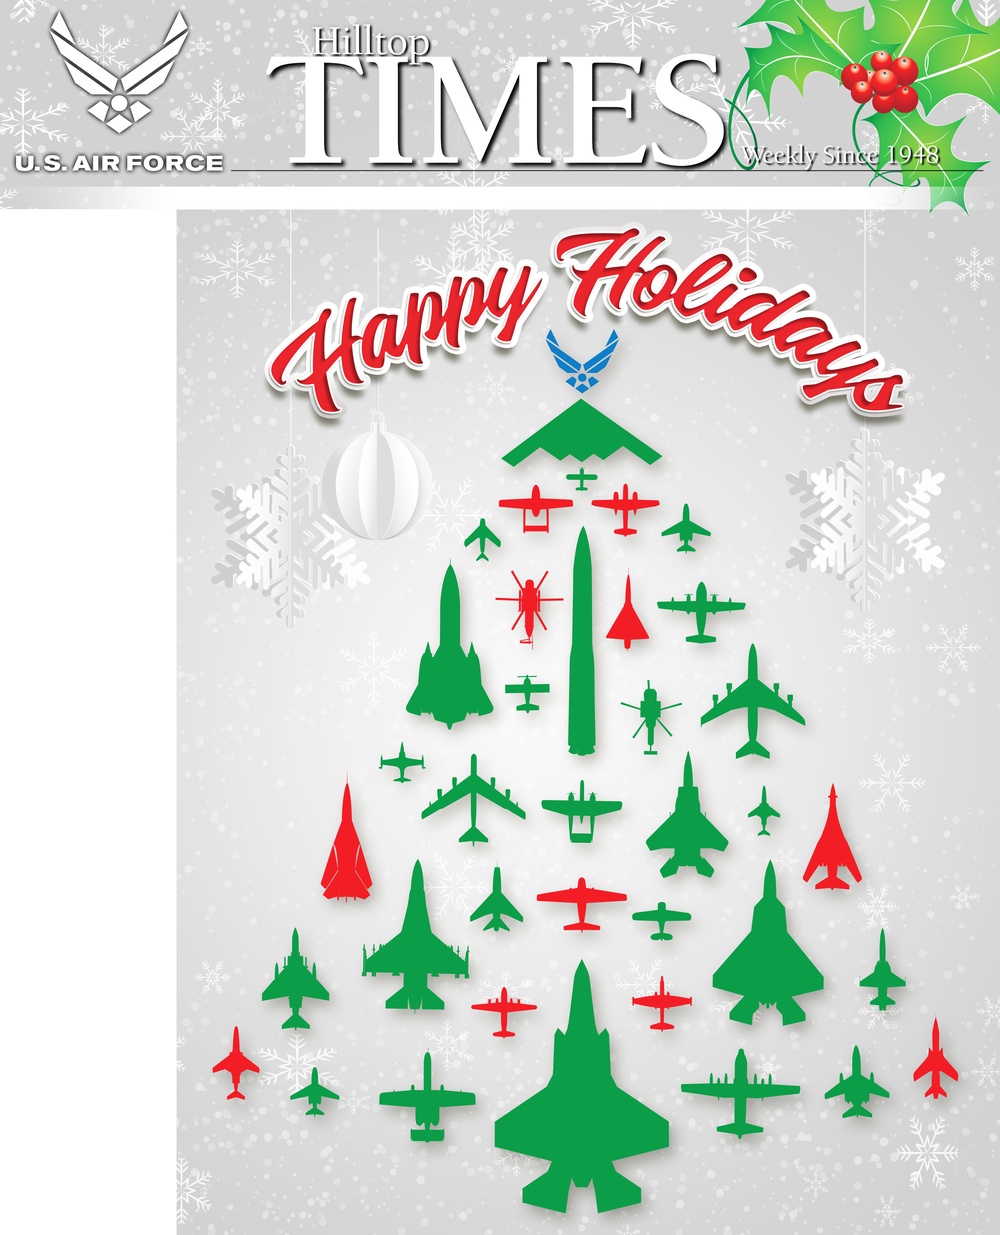 2018 Happy Holidays: Hilltop Times Cover